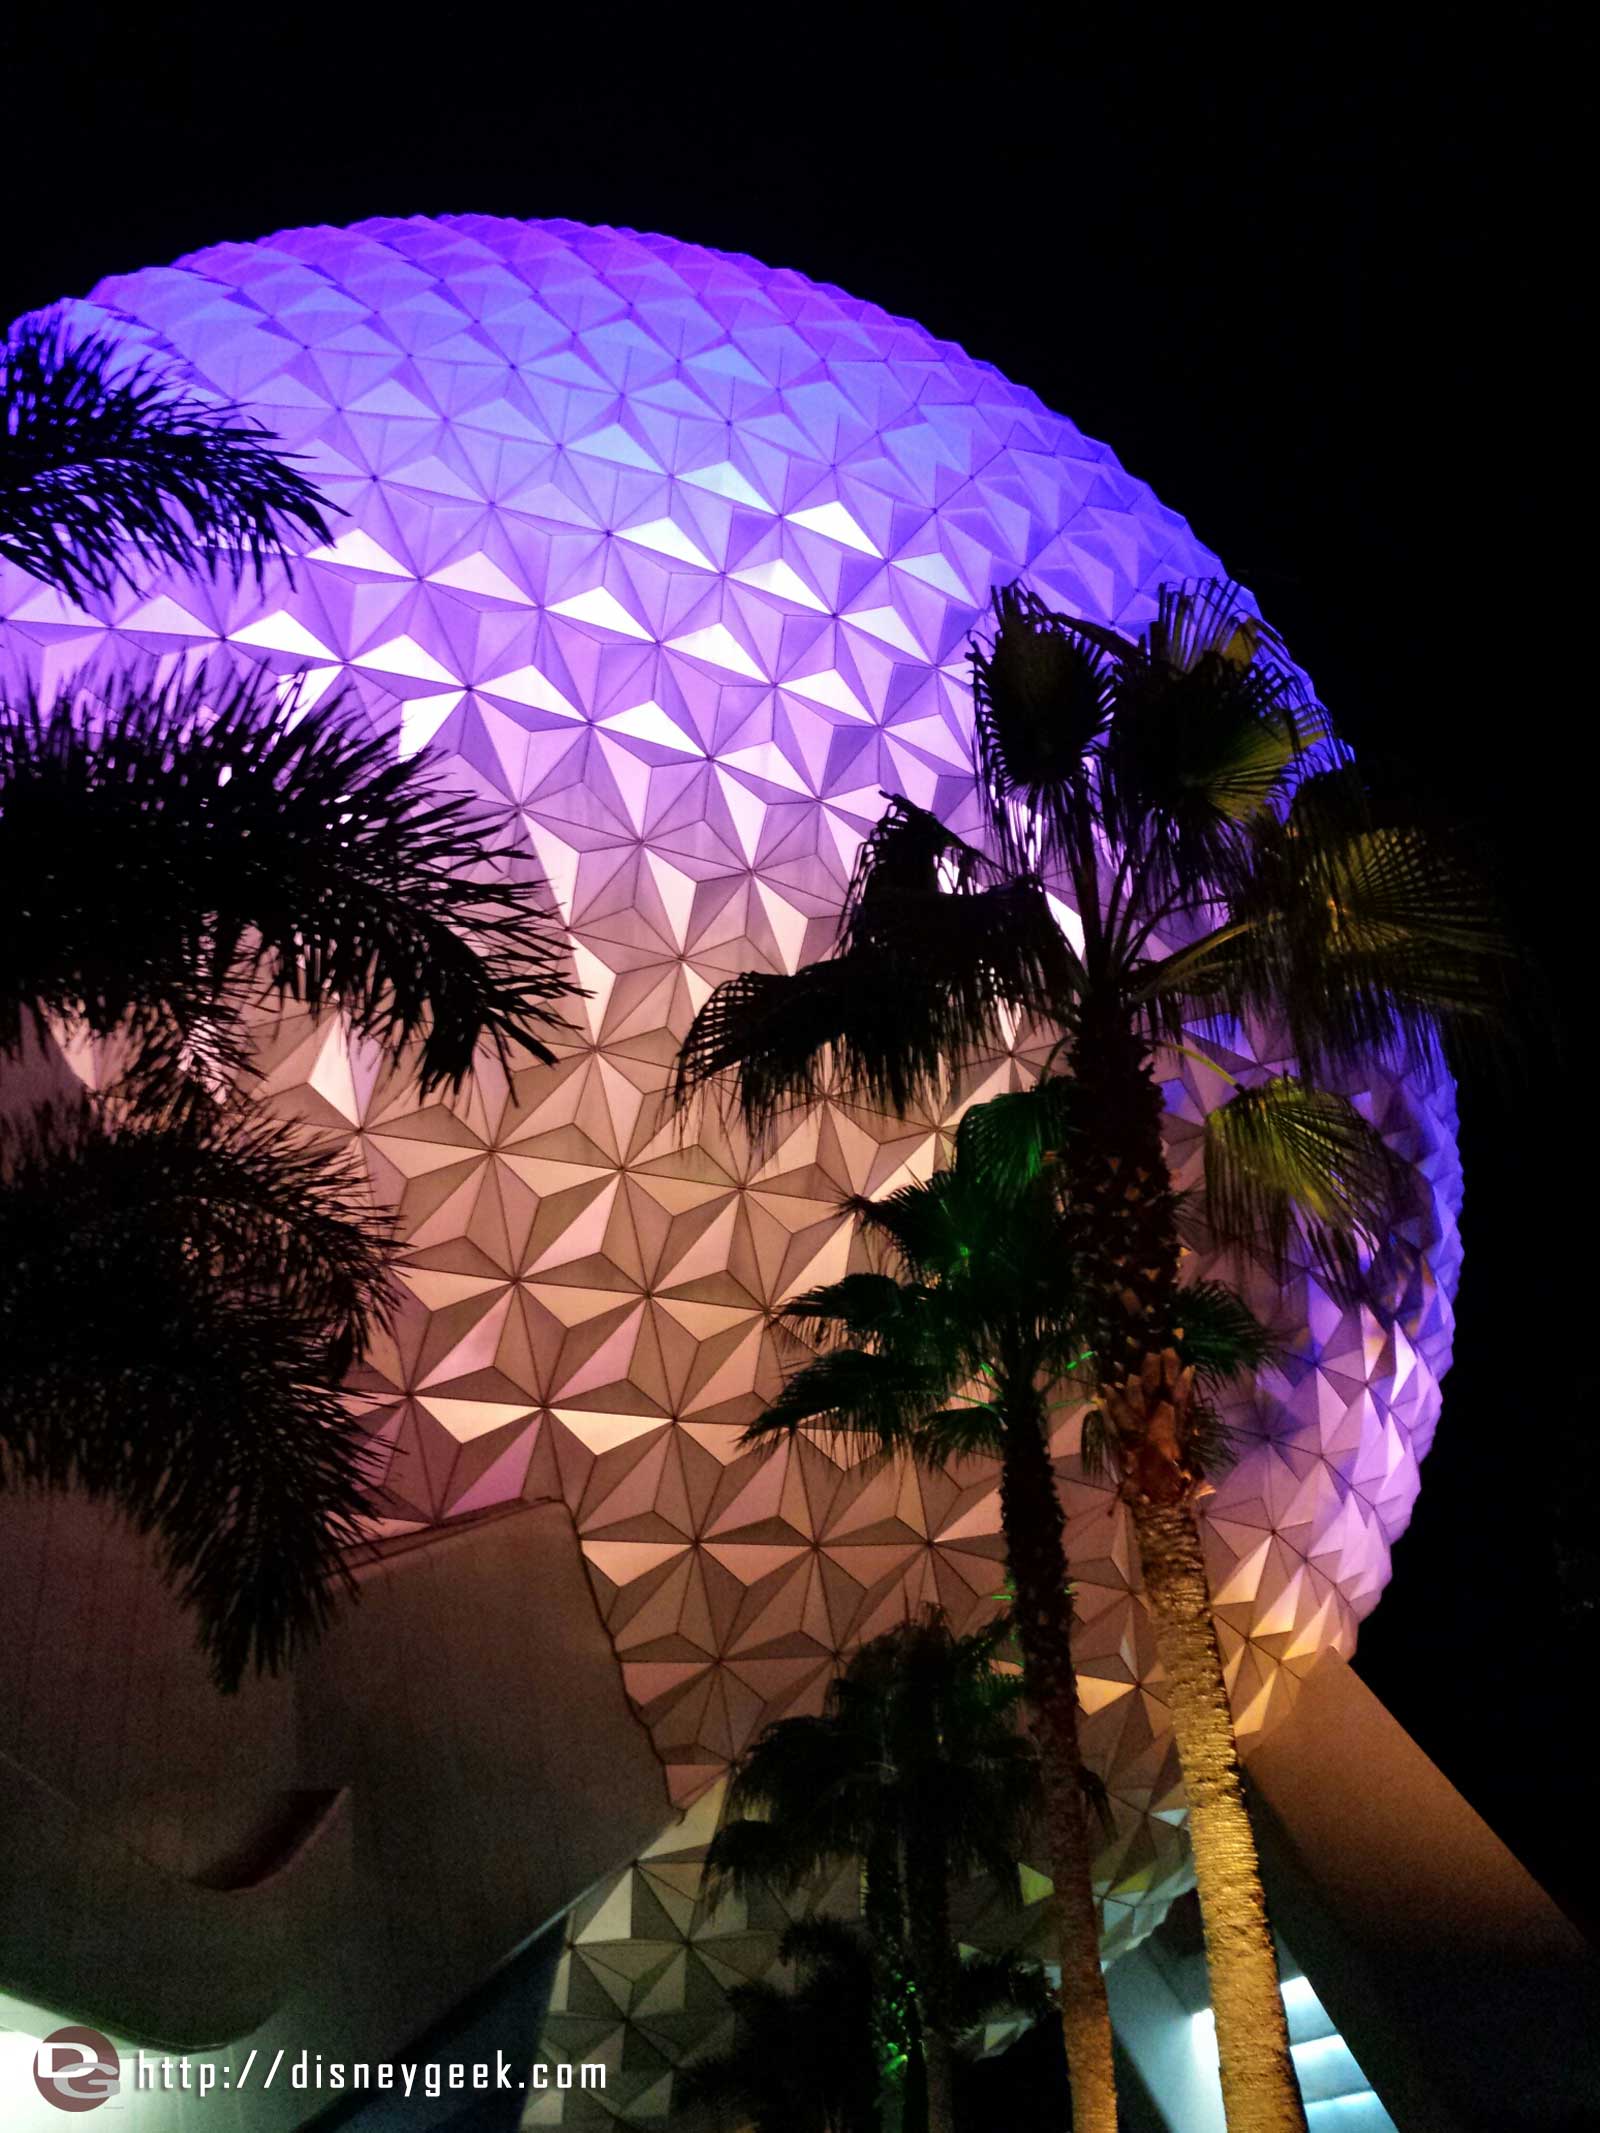 Final stop of the evening, Epcot. Spaceship Earth.